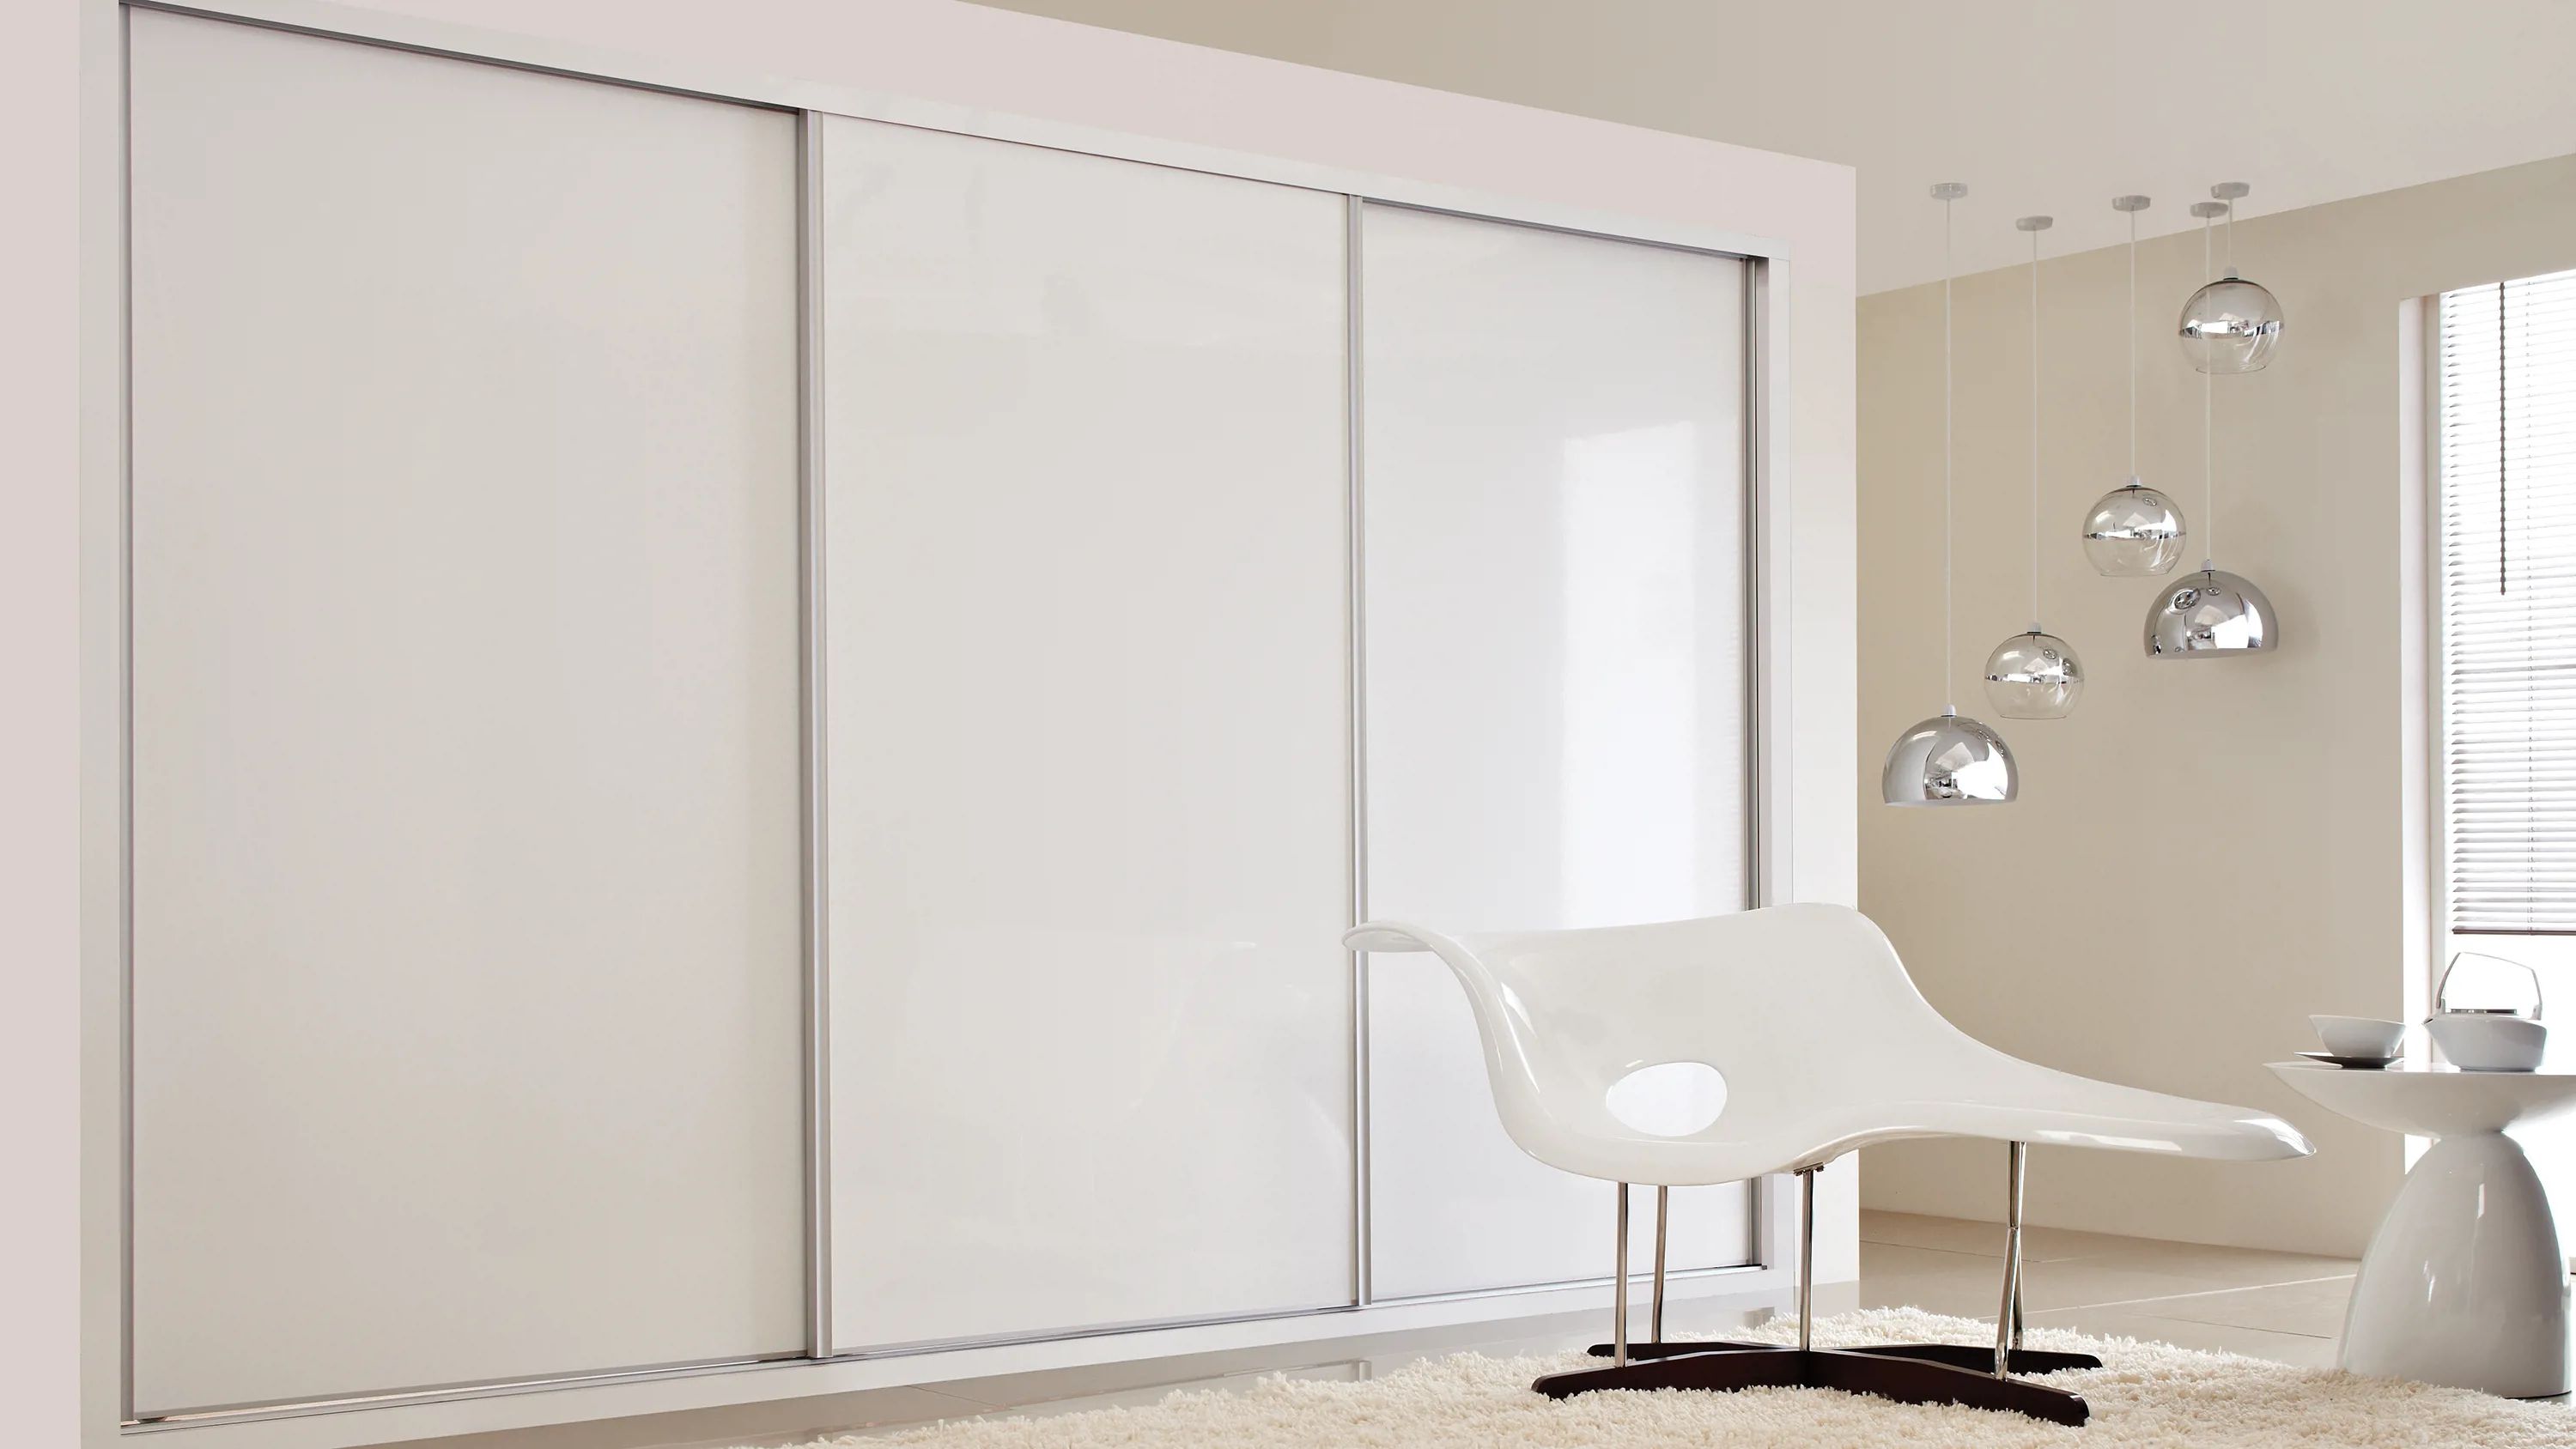 Unearth The High Gloss Fitted Sliding Wardrobes Range For Your Bedroom |  Hammonds Regarding White High Gloss Sliding Wardrobes (View 10 of 15)